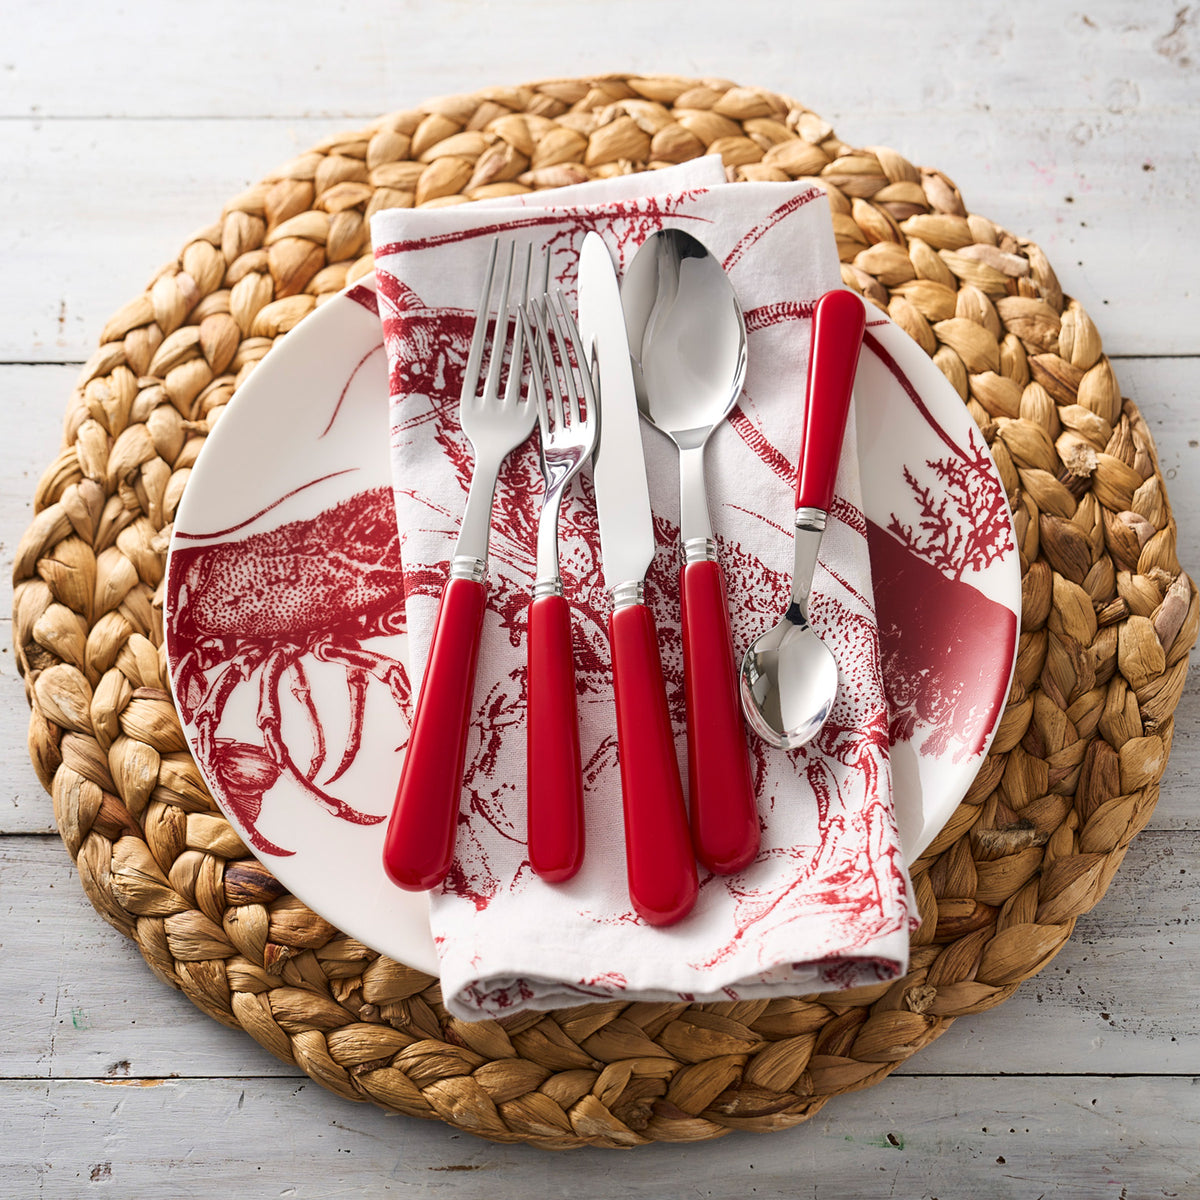 A place setting with red-handled cutlery and a red patterned napkin on a white seaside style Lobster Coupe Dinner Plate by Caskata, seated elegantly on a woven placemat.